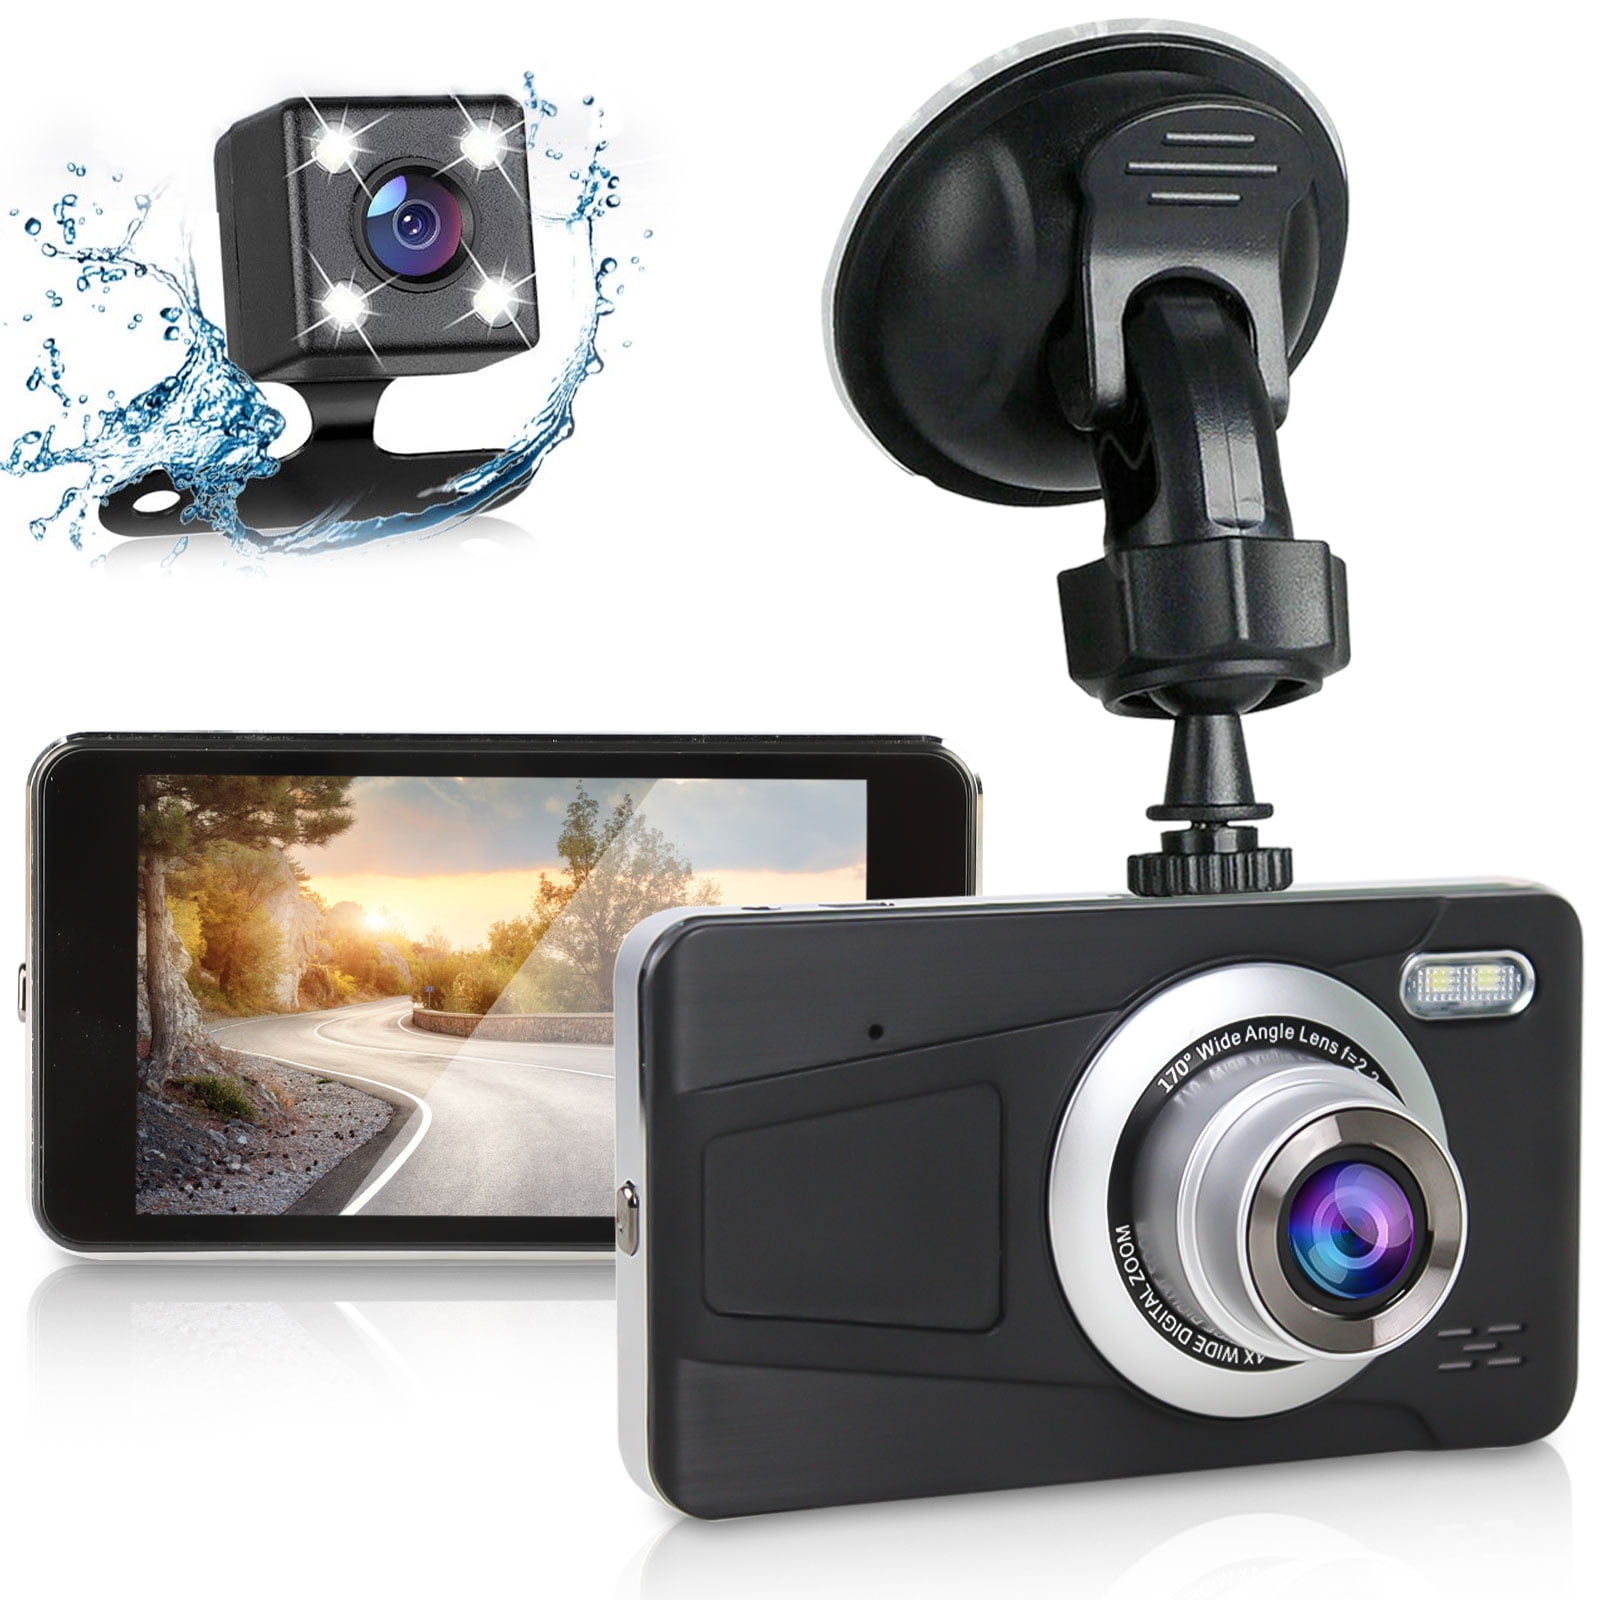 WDR Loop Recording Motion Detection Parking Monitor Dash Cam 1080P FHD DVR Car Driving Recorder 3 Inch LCD Screen 170° Wide Angle G-Sensor 